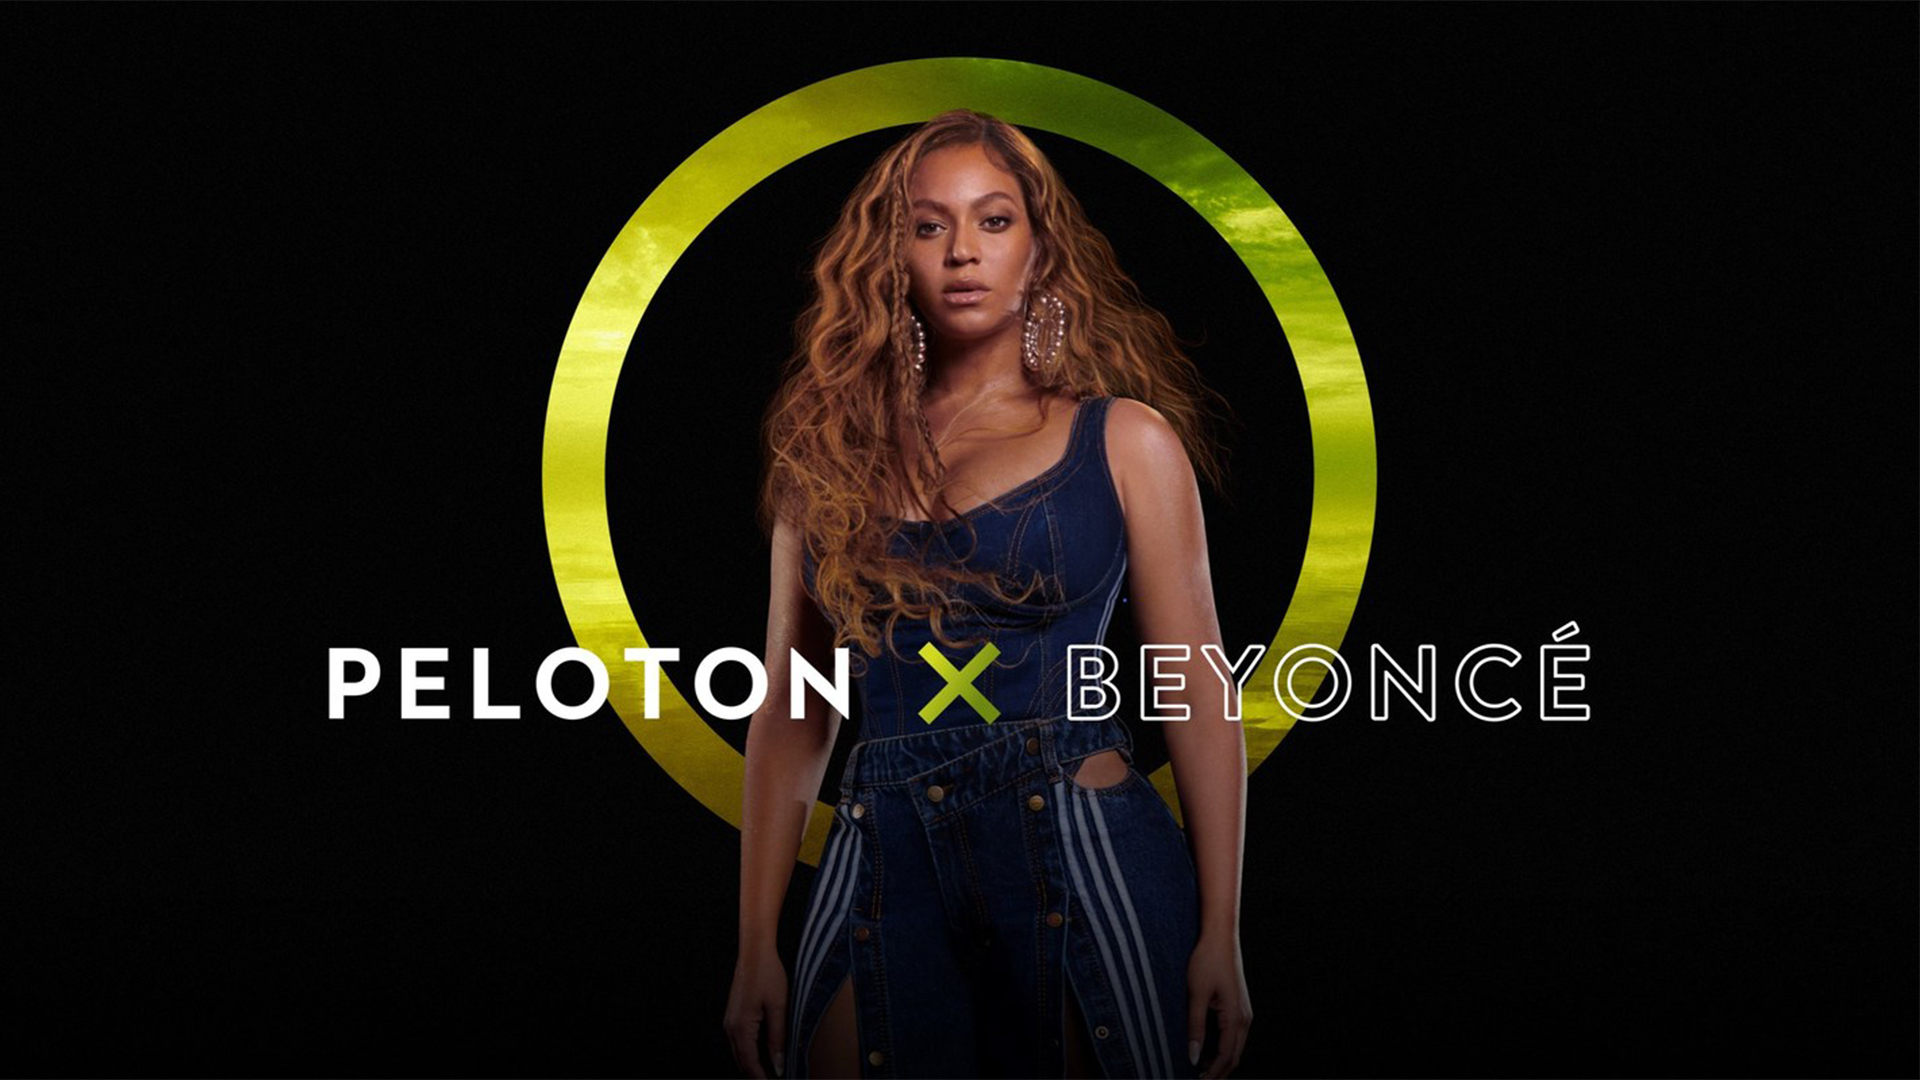 Beyoncé Expands Partnership With Peloton To Inspire HBCU Students On Their Fitness Journeys